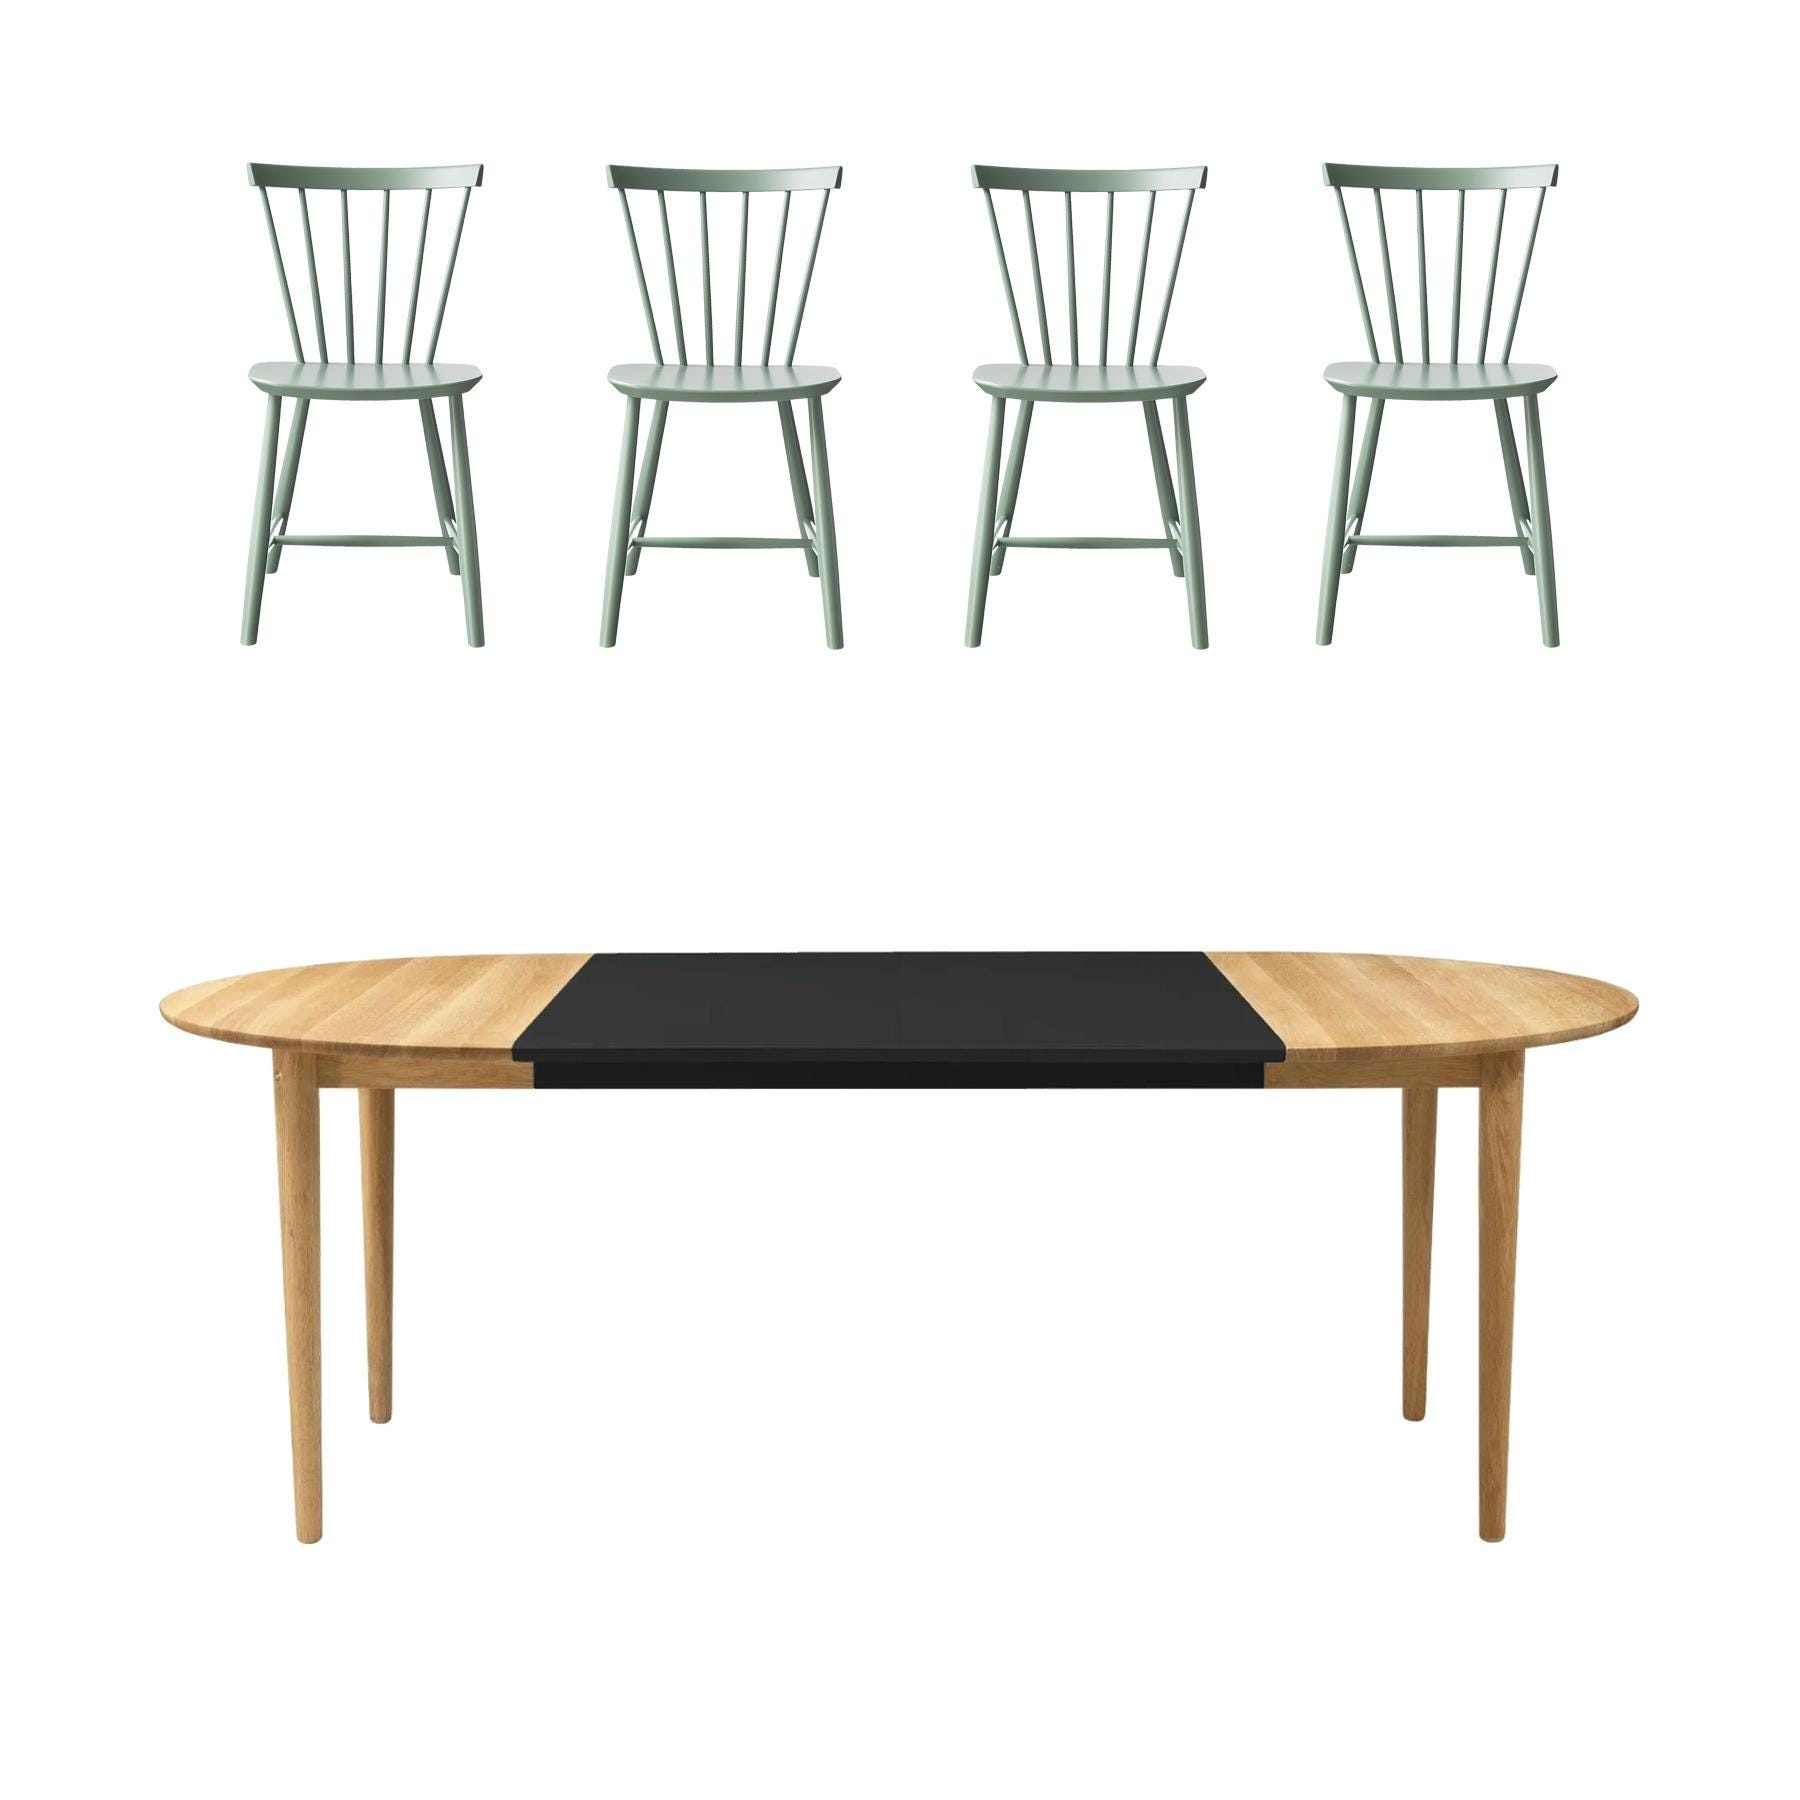 Fdb Mobler Kitchen Dining Table Bundle C62e J46 Dusty Green 2 X Black Extension Leaf Designer Furniture From Holloways Of Ludlow